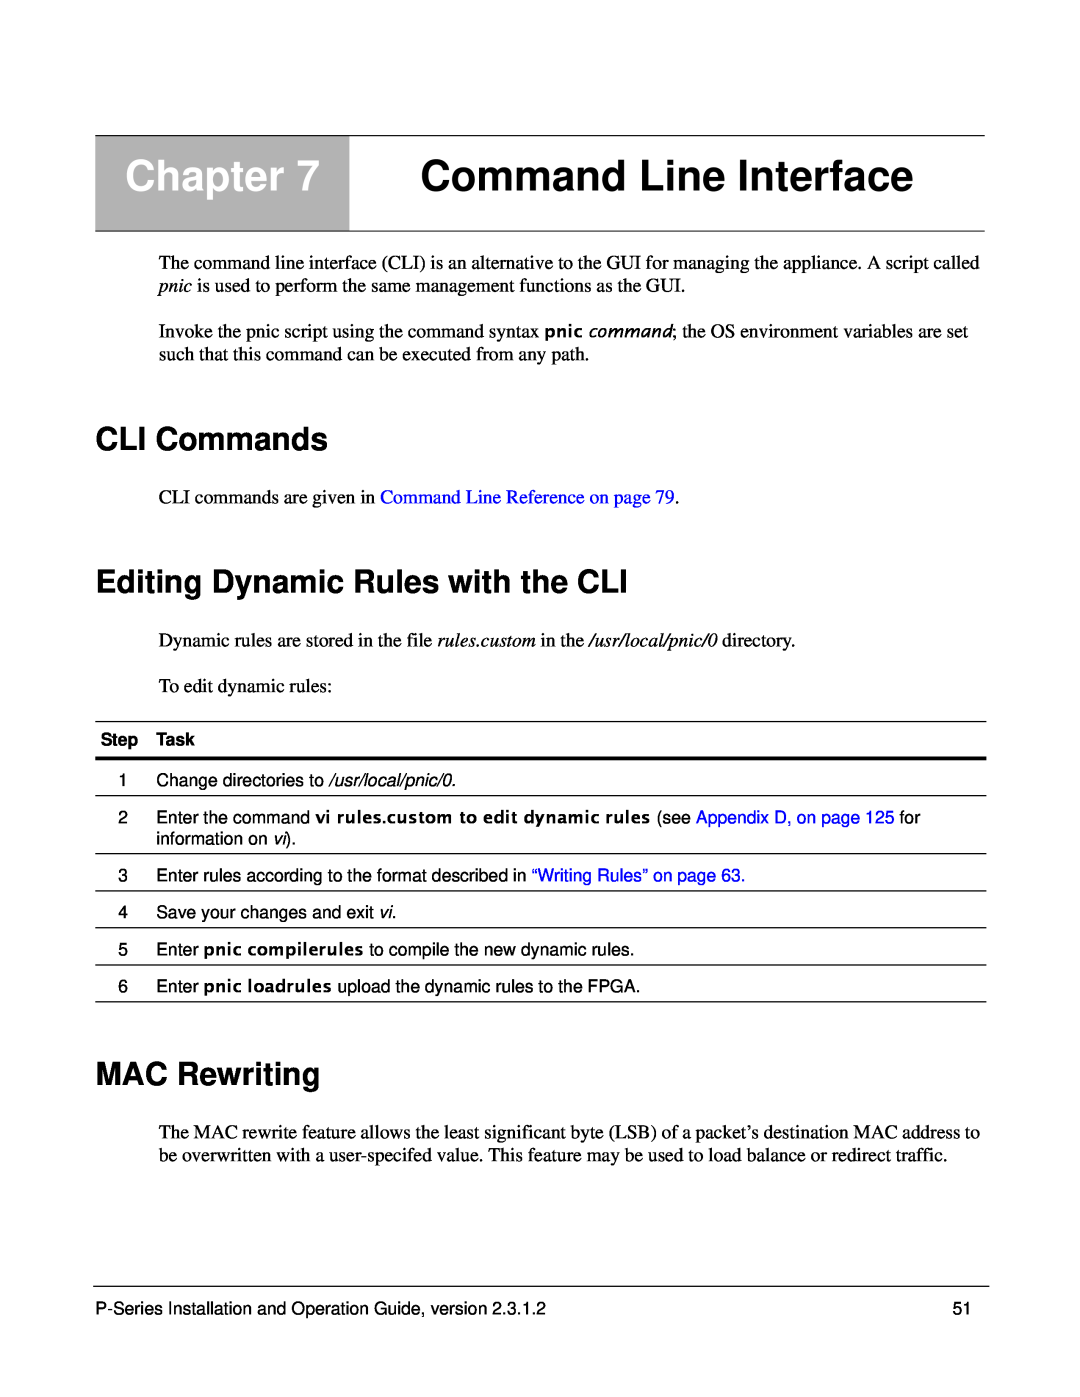 Force10 Networks 100-00055-01 Command Line Interface, CLI Commands, Editing Dynamic Rules with the CLI, MAC Rewriting 